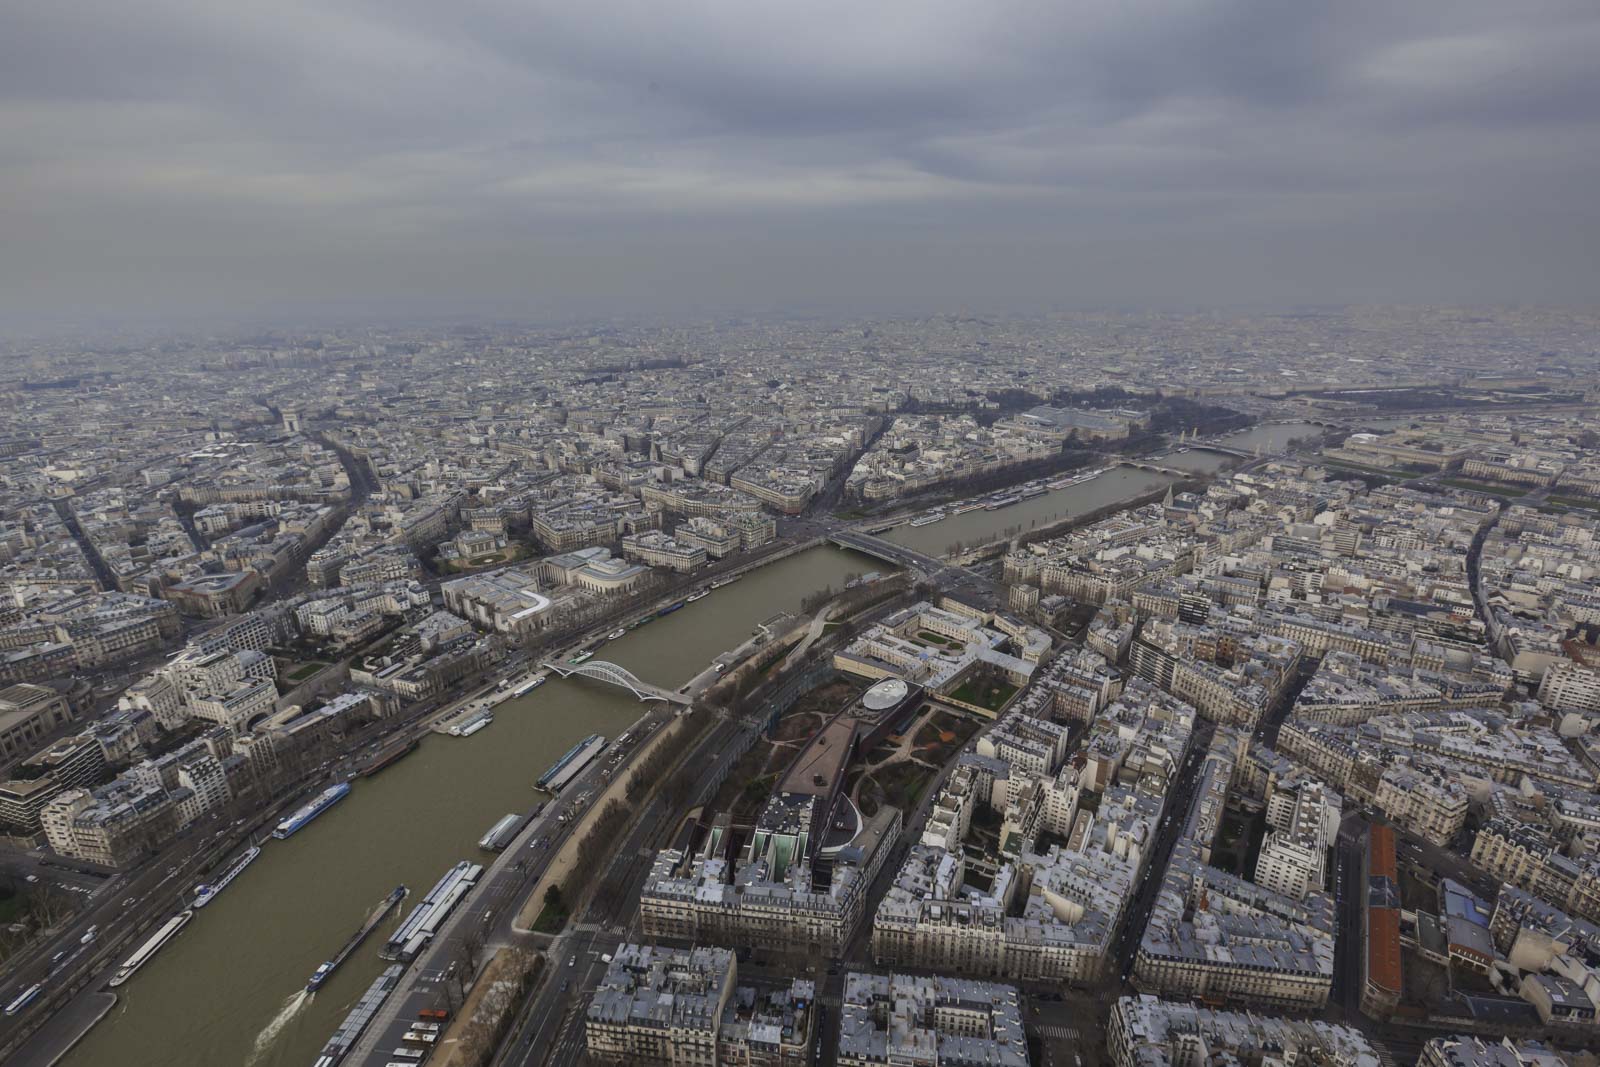 View from the second platform of the Eiffel Tower the Seine River